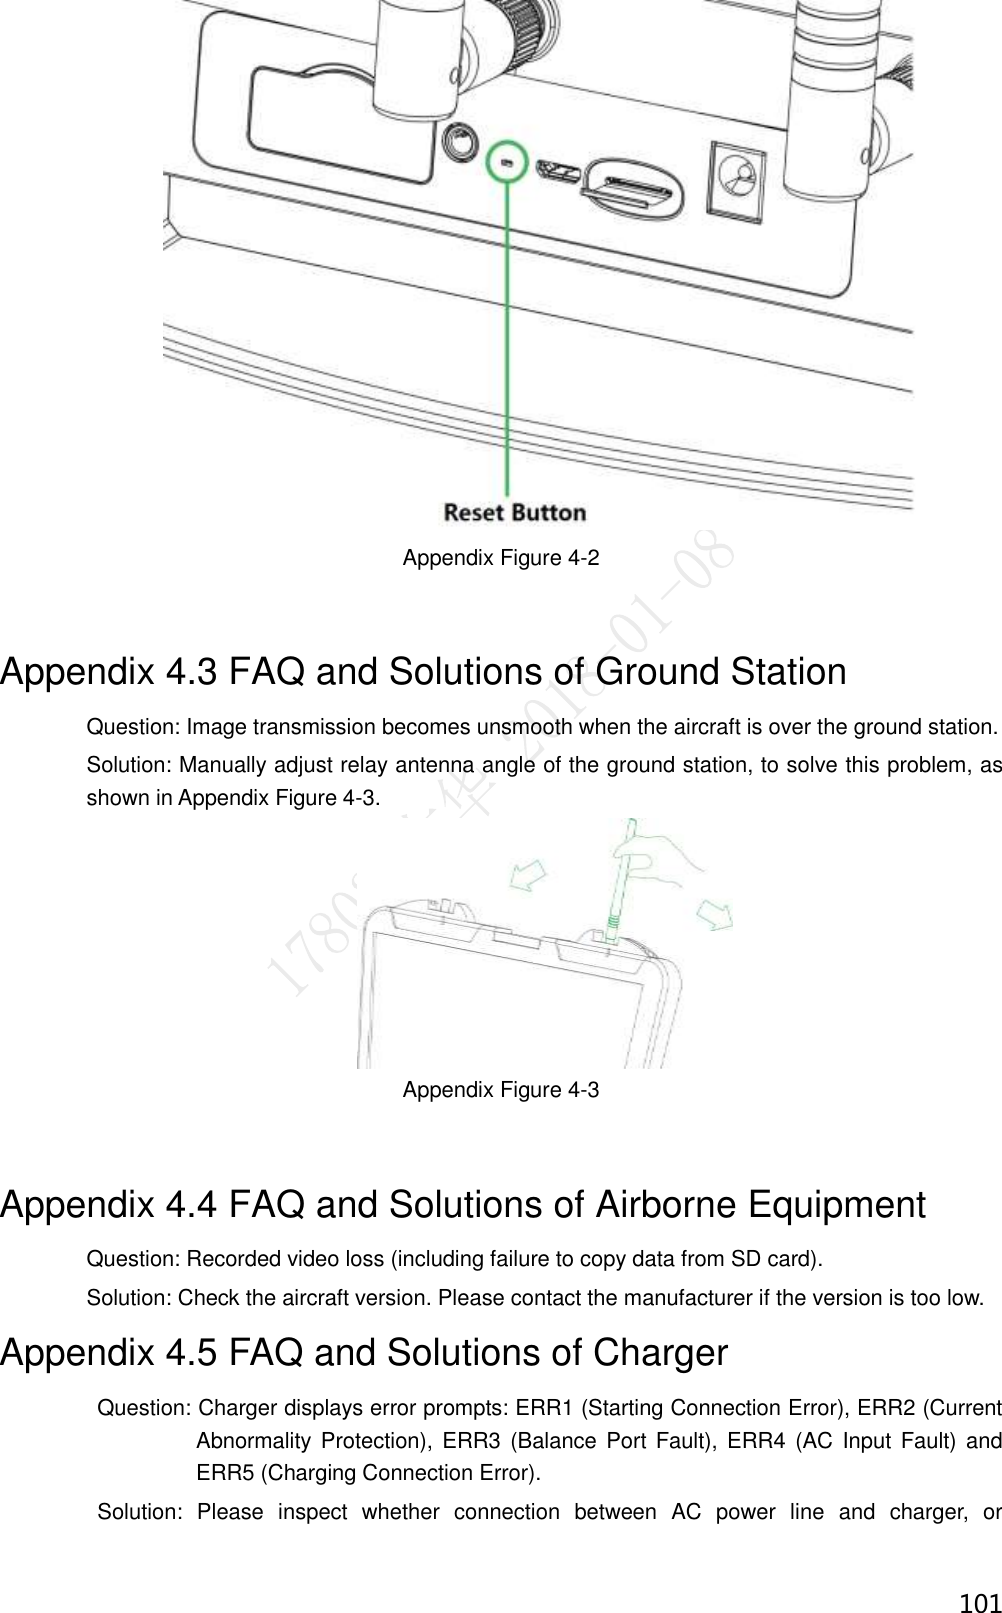  101  Appendix Figure 4-2 Appendix 4.3 FAQ and Solutions of Ground Station Question: Image transmission becomes unsmooth when the aircraft is over the ground station. Solution: Manually adjust relay antenna angle of the ground station, to solve this problem, as shown in Appendix Figure 4-3.  Appendix Figure 4-3 Appendix 4.4 FAQ and Solutions of Airborne Equipment Question: Recorded video loss (including failure to copy data from SD card). Solution: Check the aircraft version. Please contact the manufacturer if the version is too low. Appendix 4.5 FAQ and Solutions of Charger                   Question: Charger displays error prompts: ERR1 (Starting Connection Error), ERR2 (Current Abnormality  Protection), ERR3 (Balance Port Fault), ERR4  (AC Input Fault) and ERR5 (Charging Connection Error).                   Solution:  Please  inspect  whether  connection  between  AC  power  line  and  charger,  or 